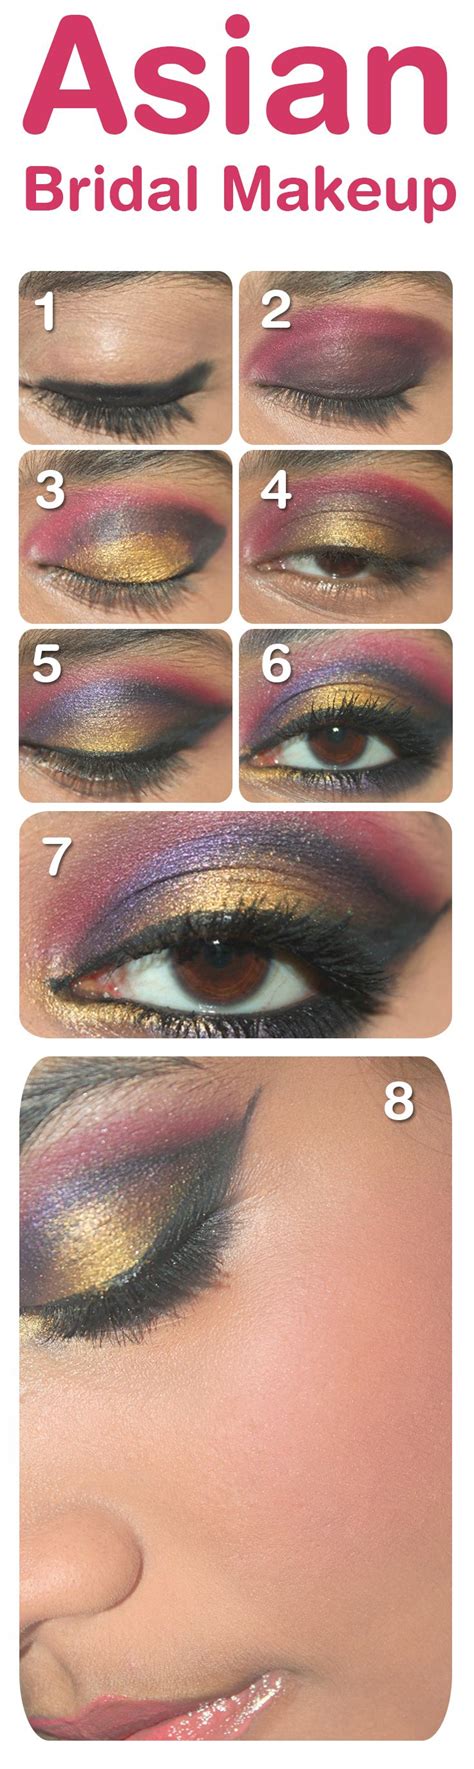 10 Easy Steps For Asian Bridal Makeup Step By Step Tutorial With